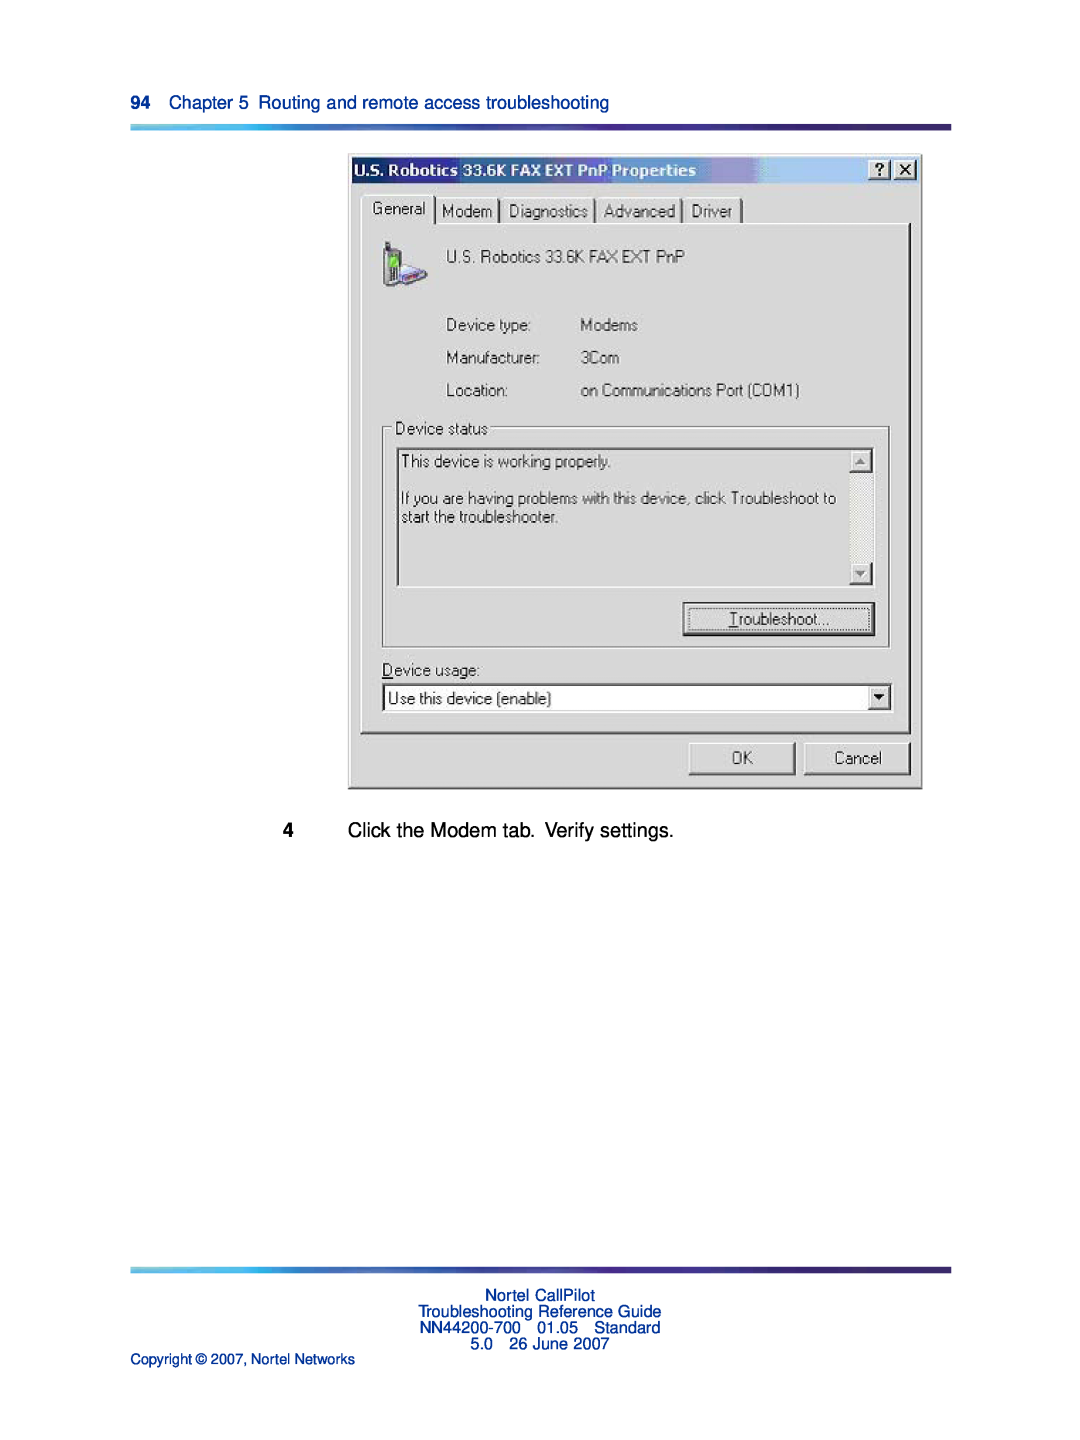 Nortel Networks NN44200-700 manual Click the Modem tab. Verify settings, Routing and remote access troubleshooting 